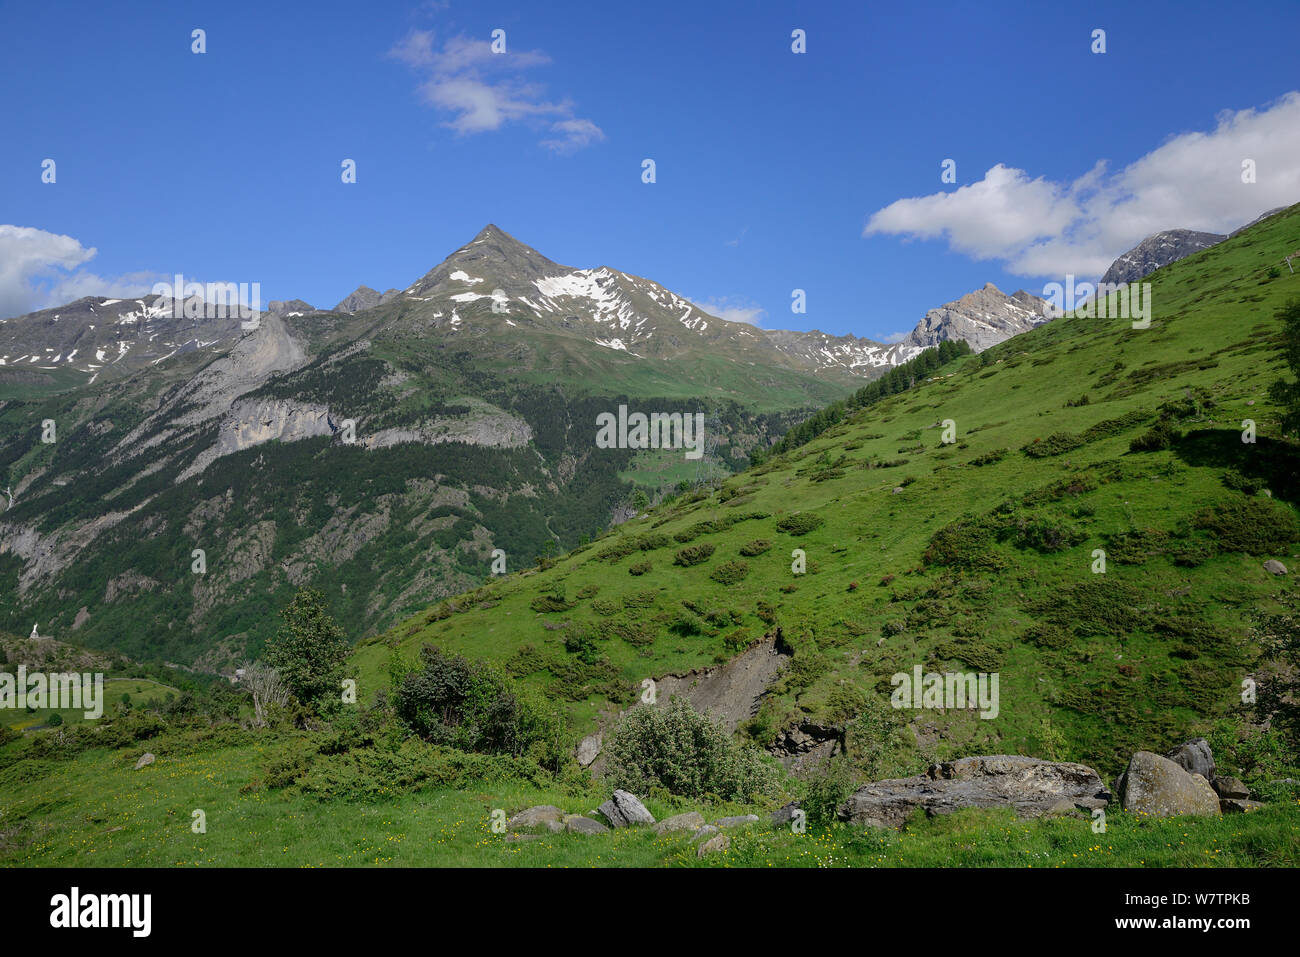 Pimene mountain from Vallee des Especieres, Pyrenees National Park, France, July 2013. Stock Photo